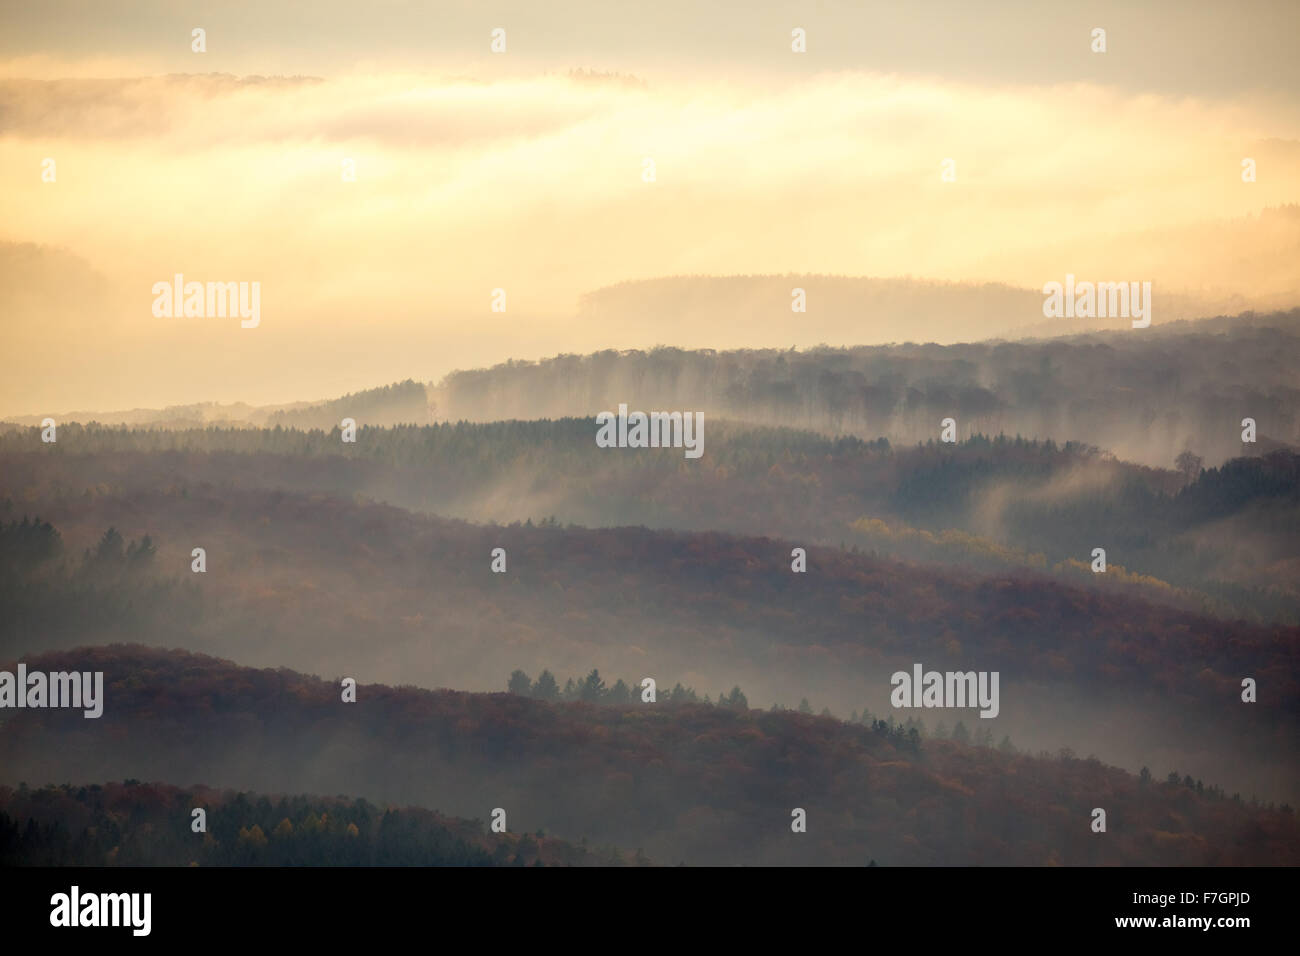 Forests of the Middle Rhine Taunus in fog, Taunus, Forest, Dachsenhausen, Rhine Valley, Rhineland-Palatinate, Germany Europe, Stock Photo